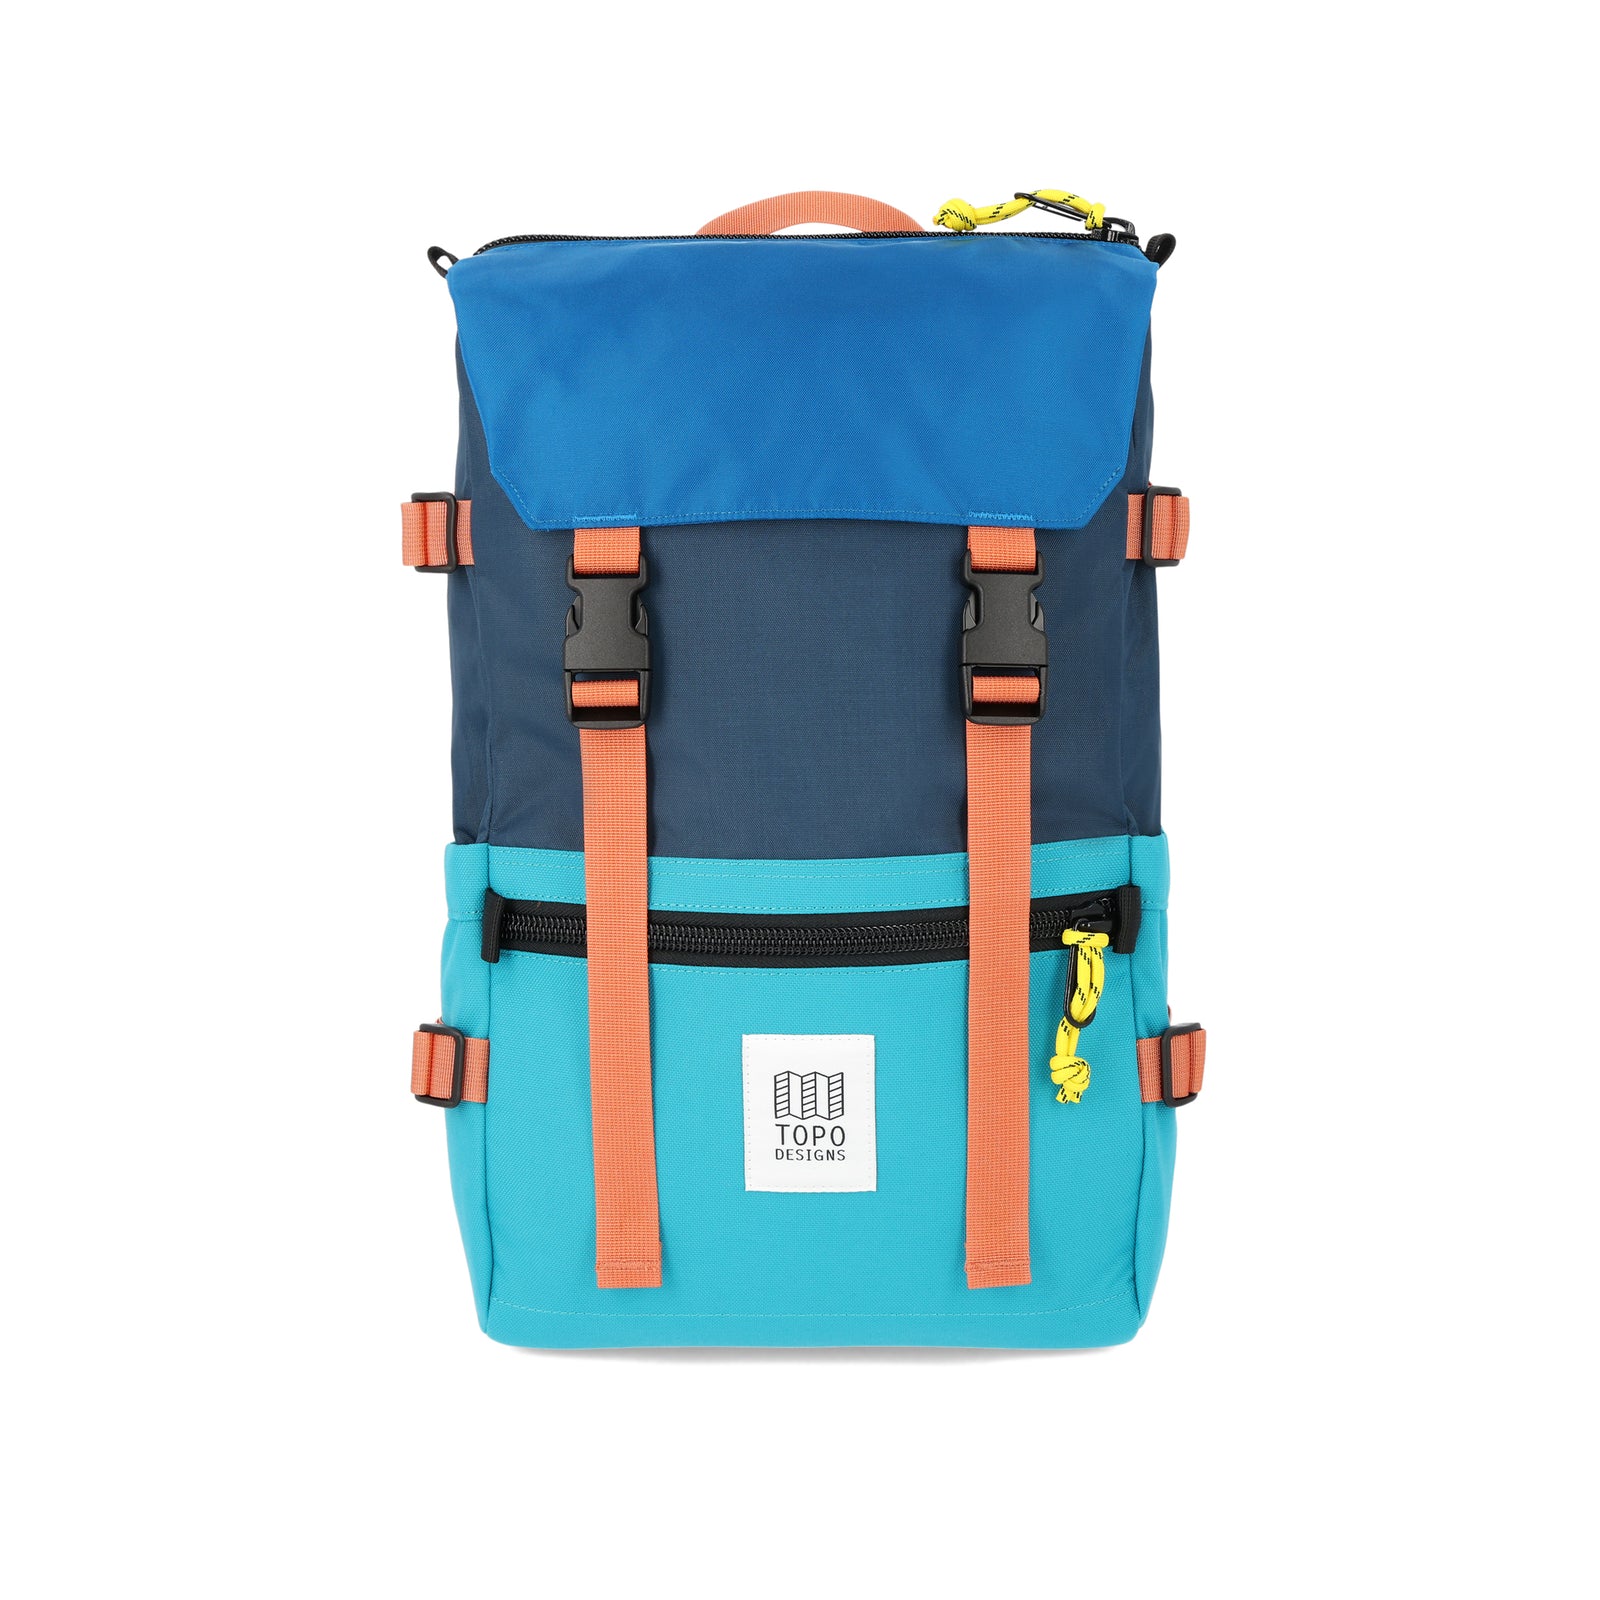 Topo Designs Rover Pack Classic laptop backpack in "Tile Blue / Pond Blue".